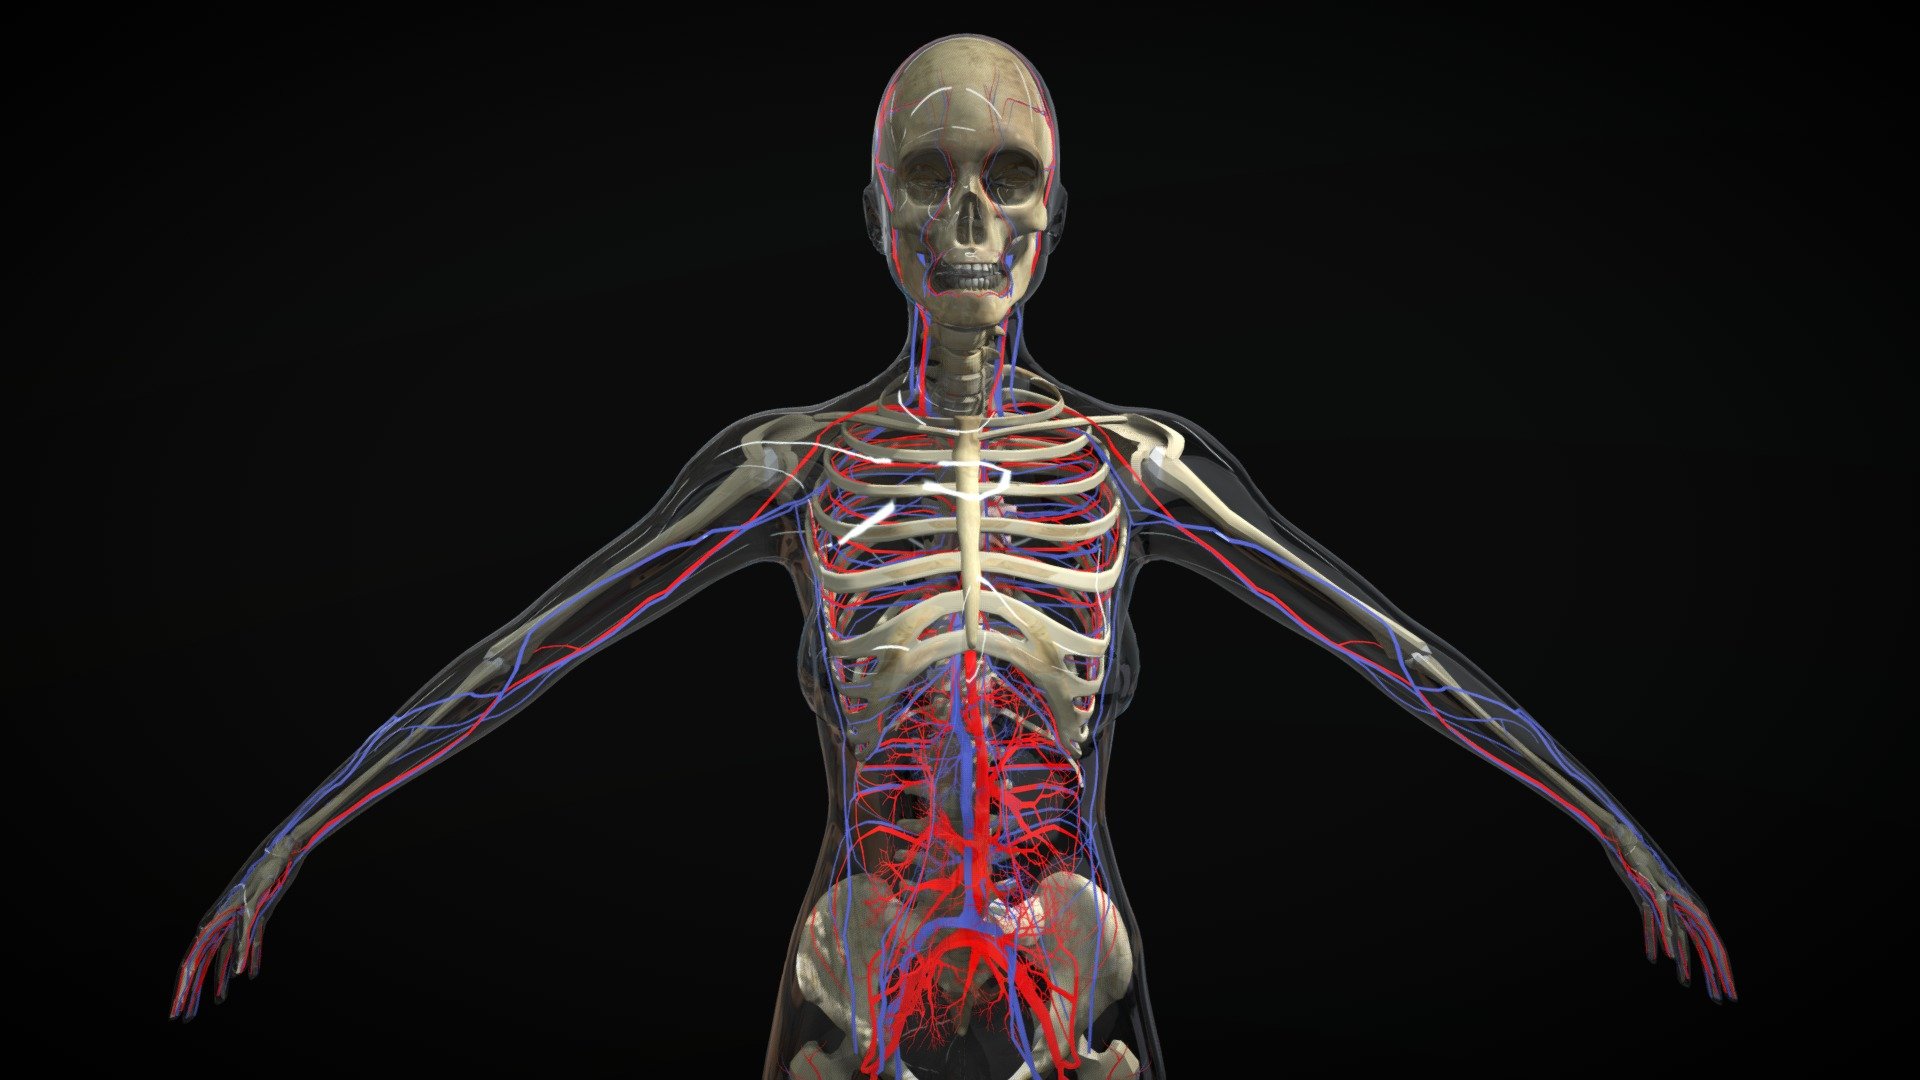 x-Ray Female Skin showing Circulatory System with Skeleton.  Download includes: OBJ, FBX, Maya 2018 (Arnold Render), 3D Studio Max 2016 (Mental Ray Render).  Both Maya and 3DSMax files include xRay shaders for skin 3d model